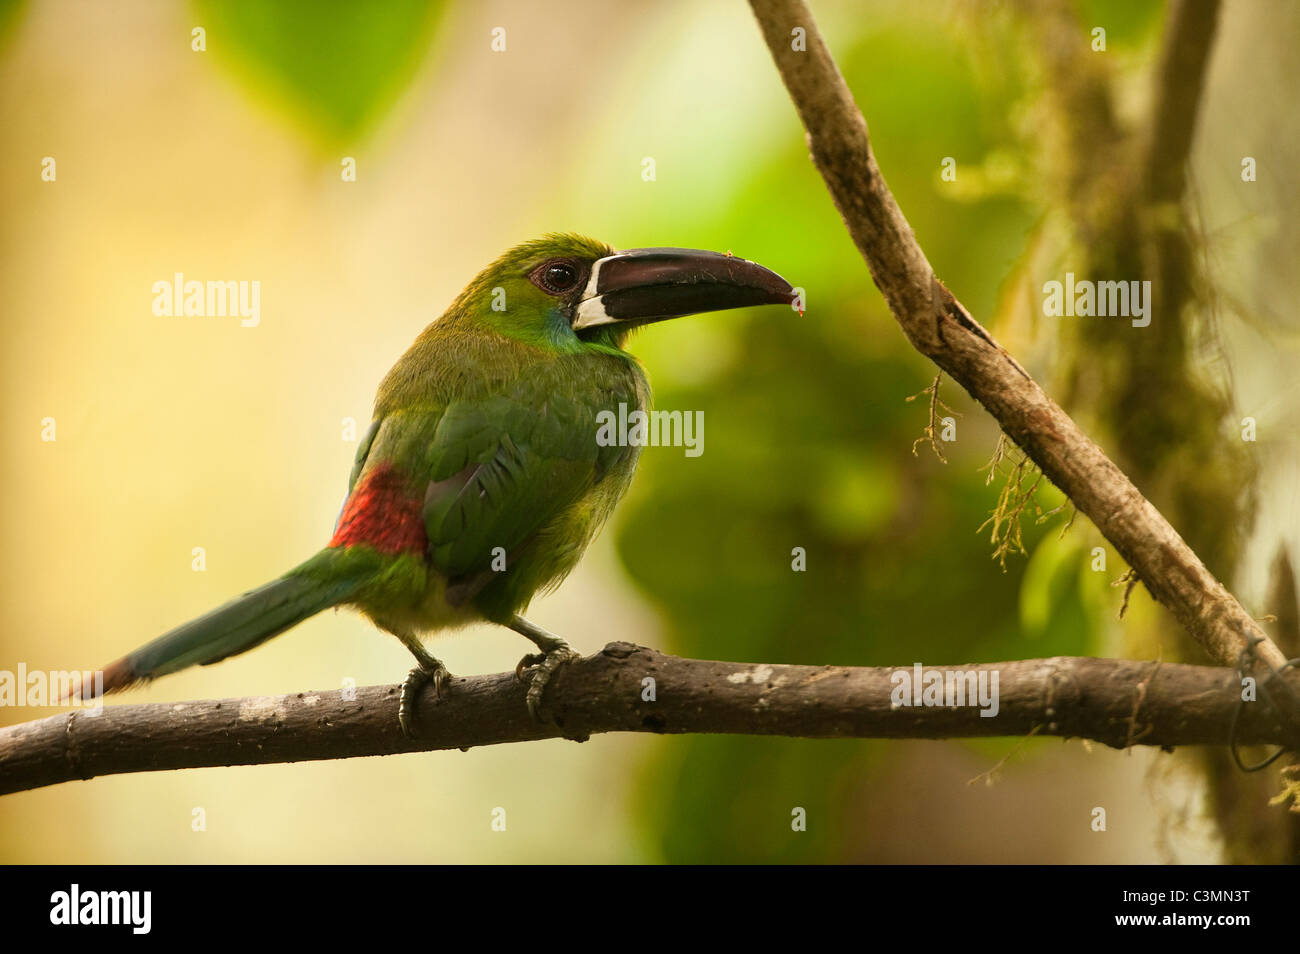 Crimson-rumped Toucanet (Aulacorhynchus haematopygus) perched on a branch. Mindo Cloud Forest, west slope of Andes, Ecuador. Stock Photo